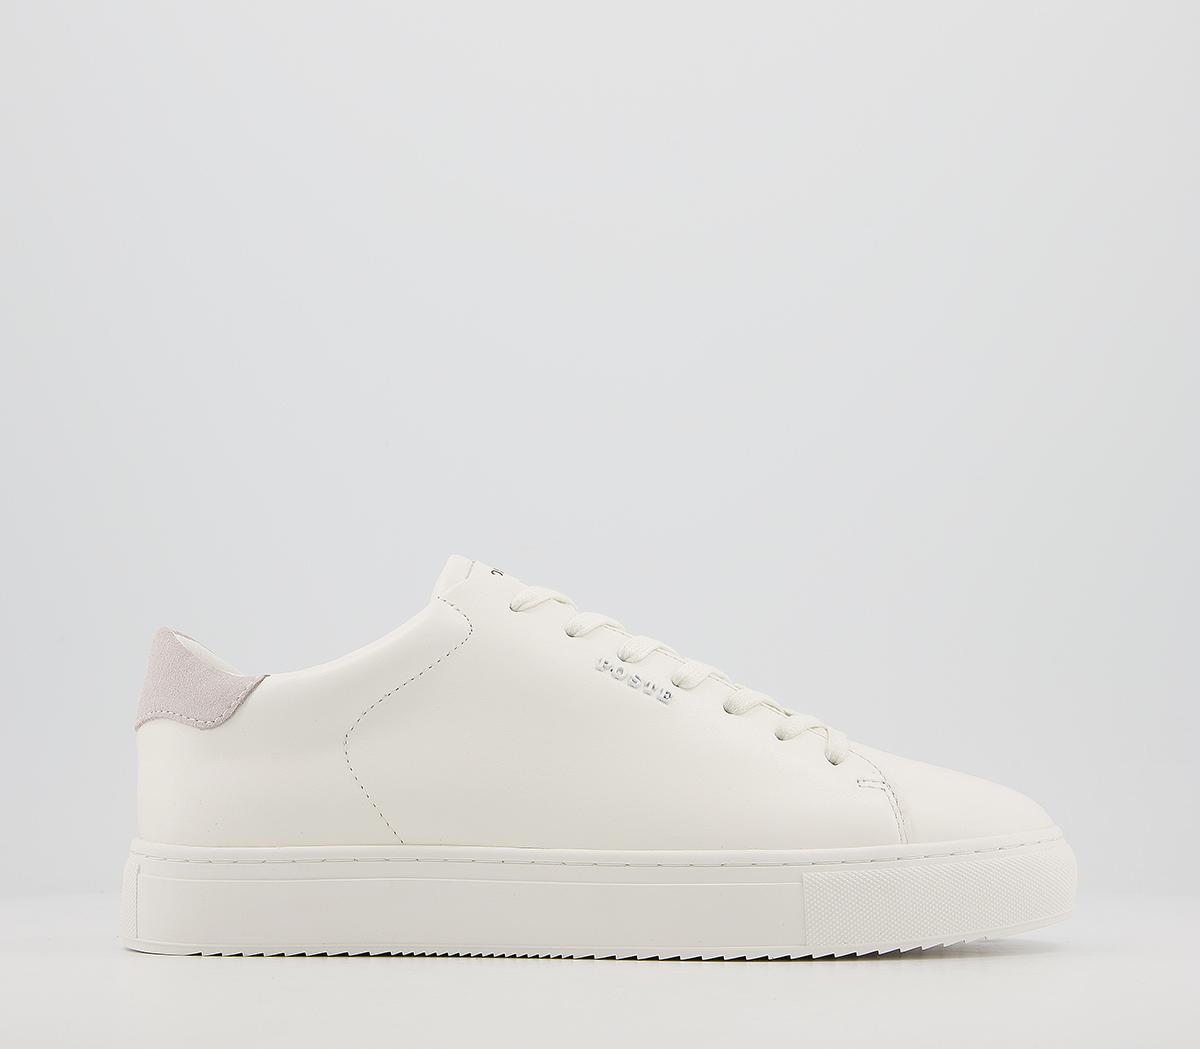 PostePierre TrainersWhite Leather